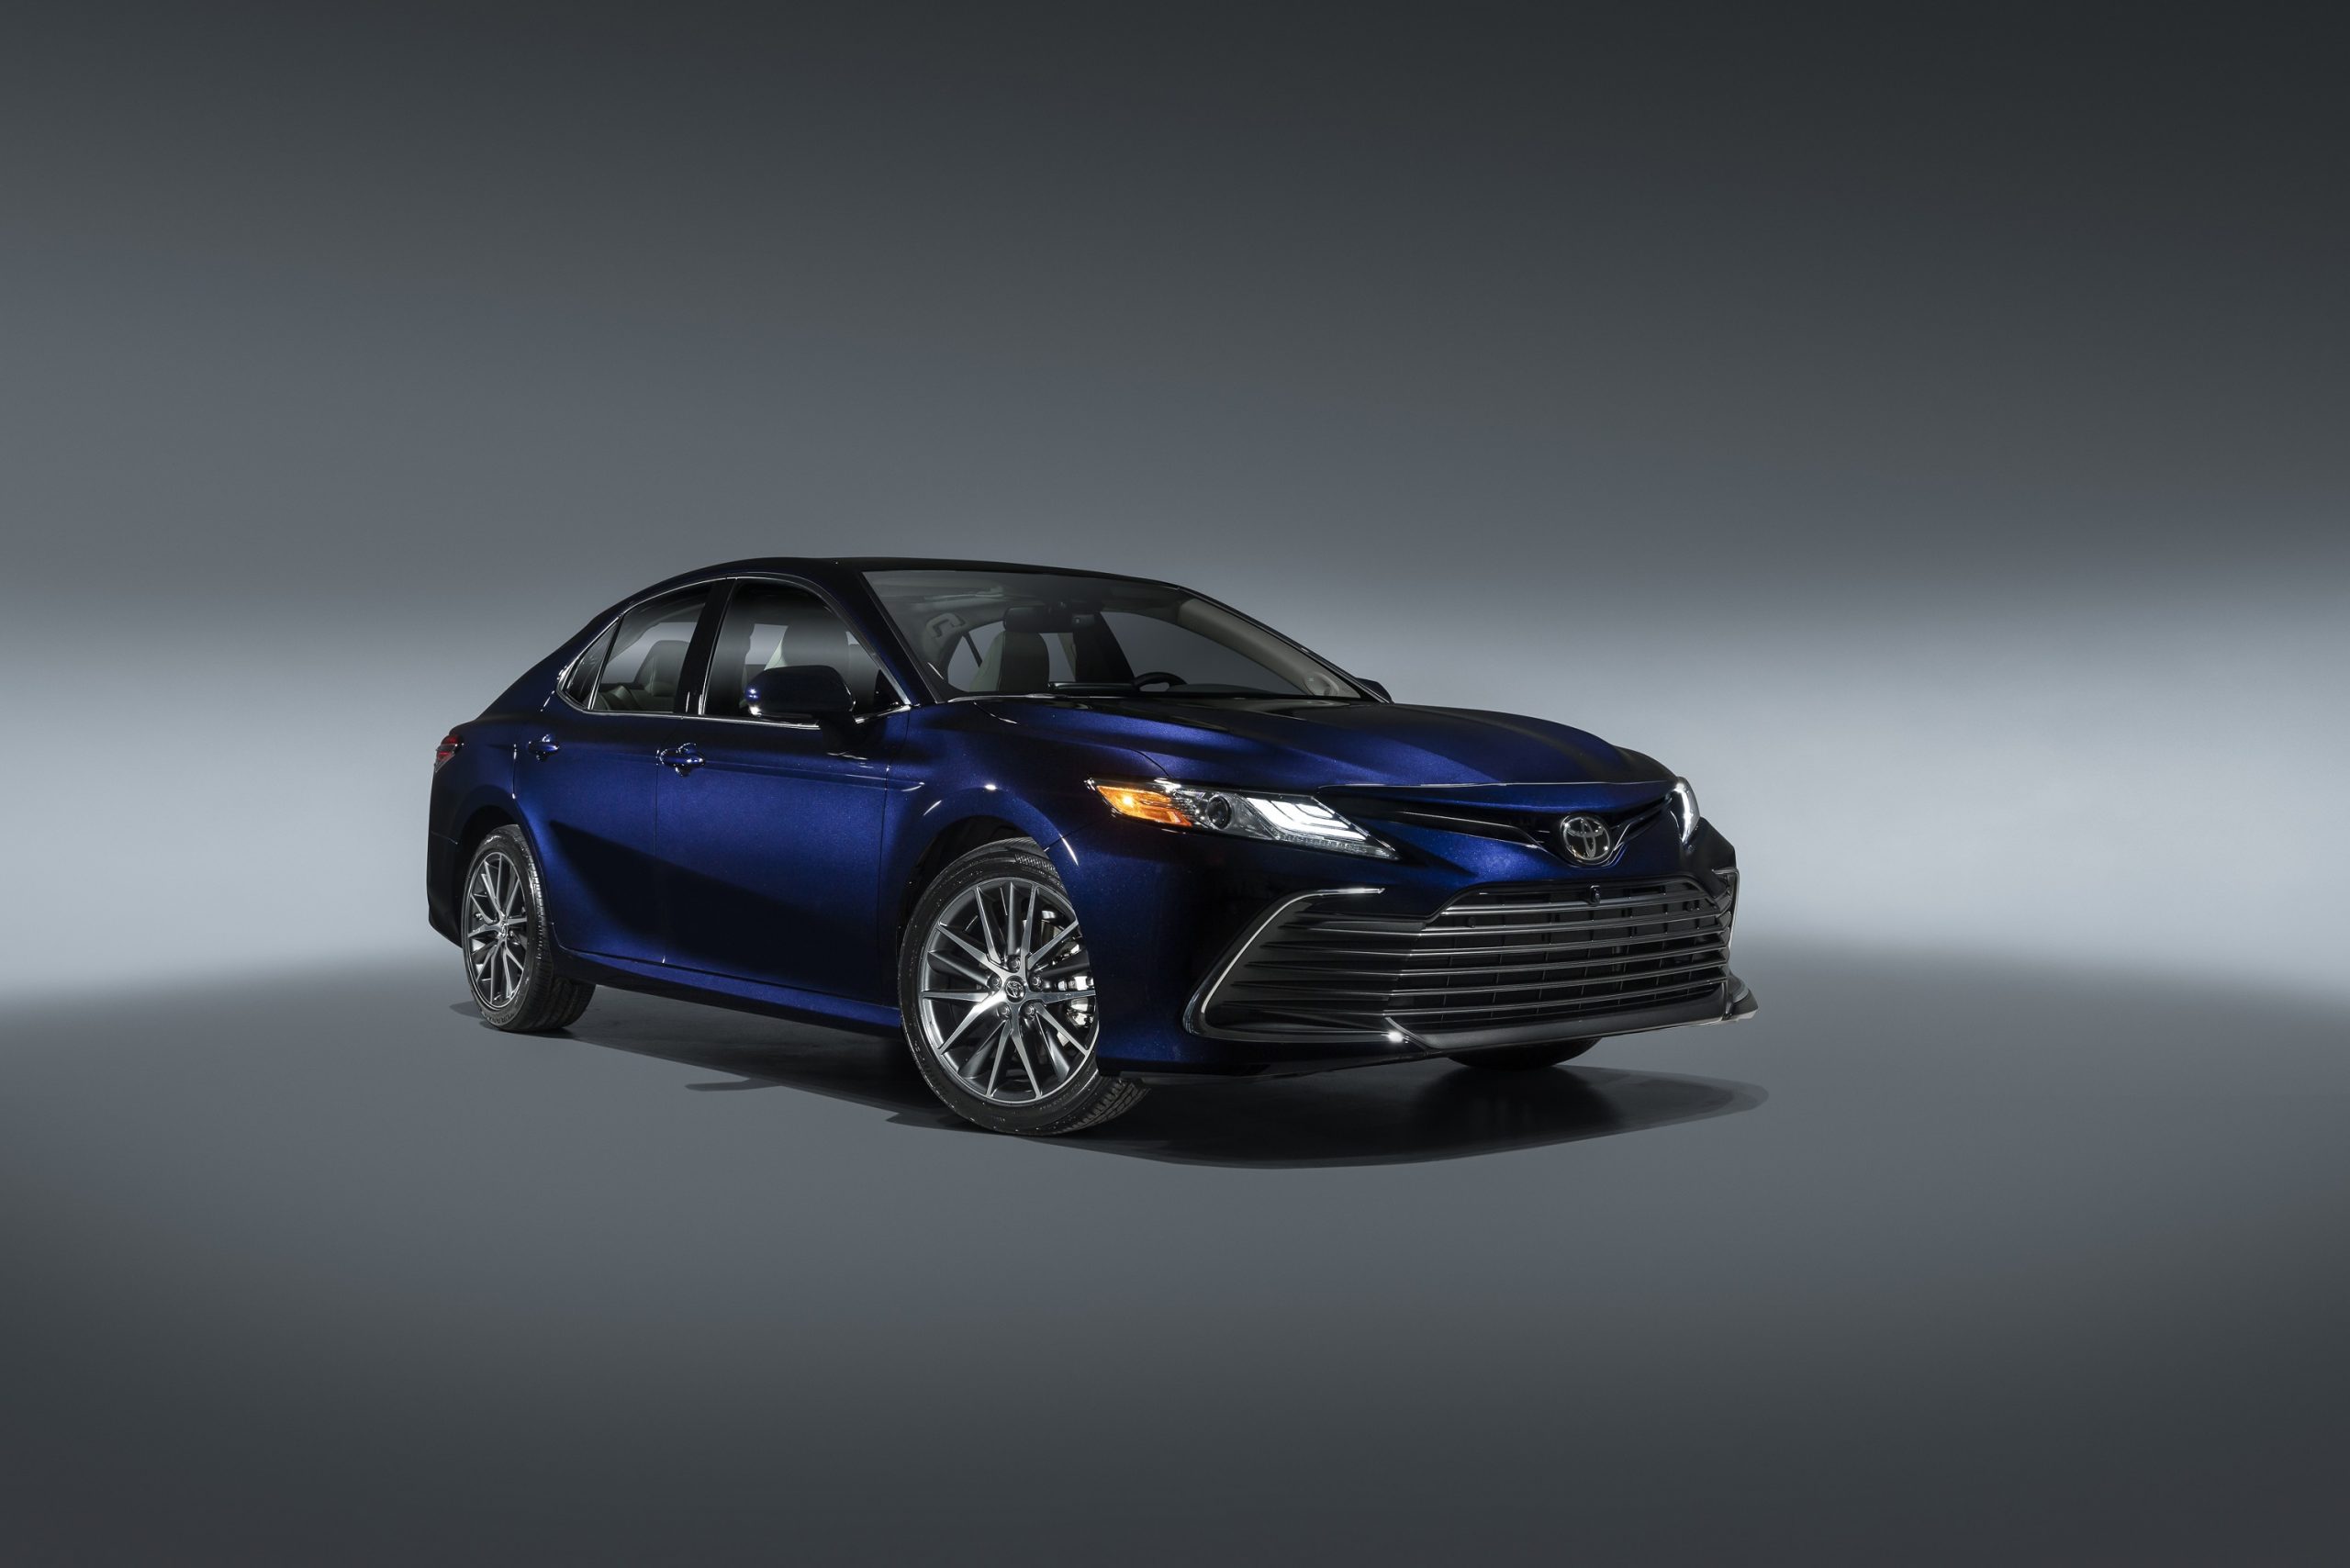 A dark blue Camry shot in a photo studio from the front 3/4 angle